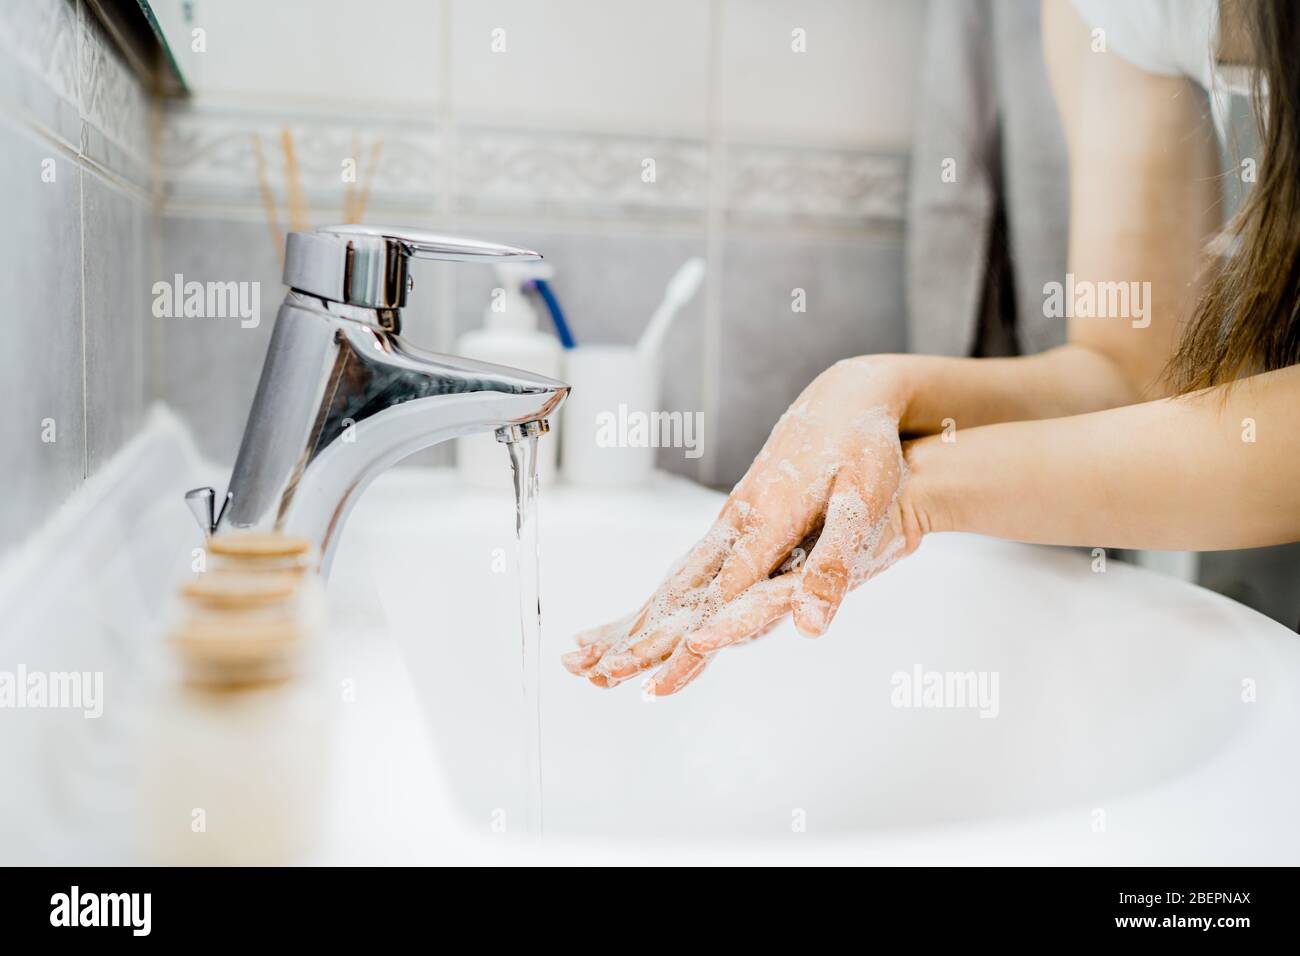 Antiseptic hand washing procedure with soap and water in the bathroom.Decontamination steps of hand hygiene routine.Cleaning hands, palms, interlaced finger Stock Photo